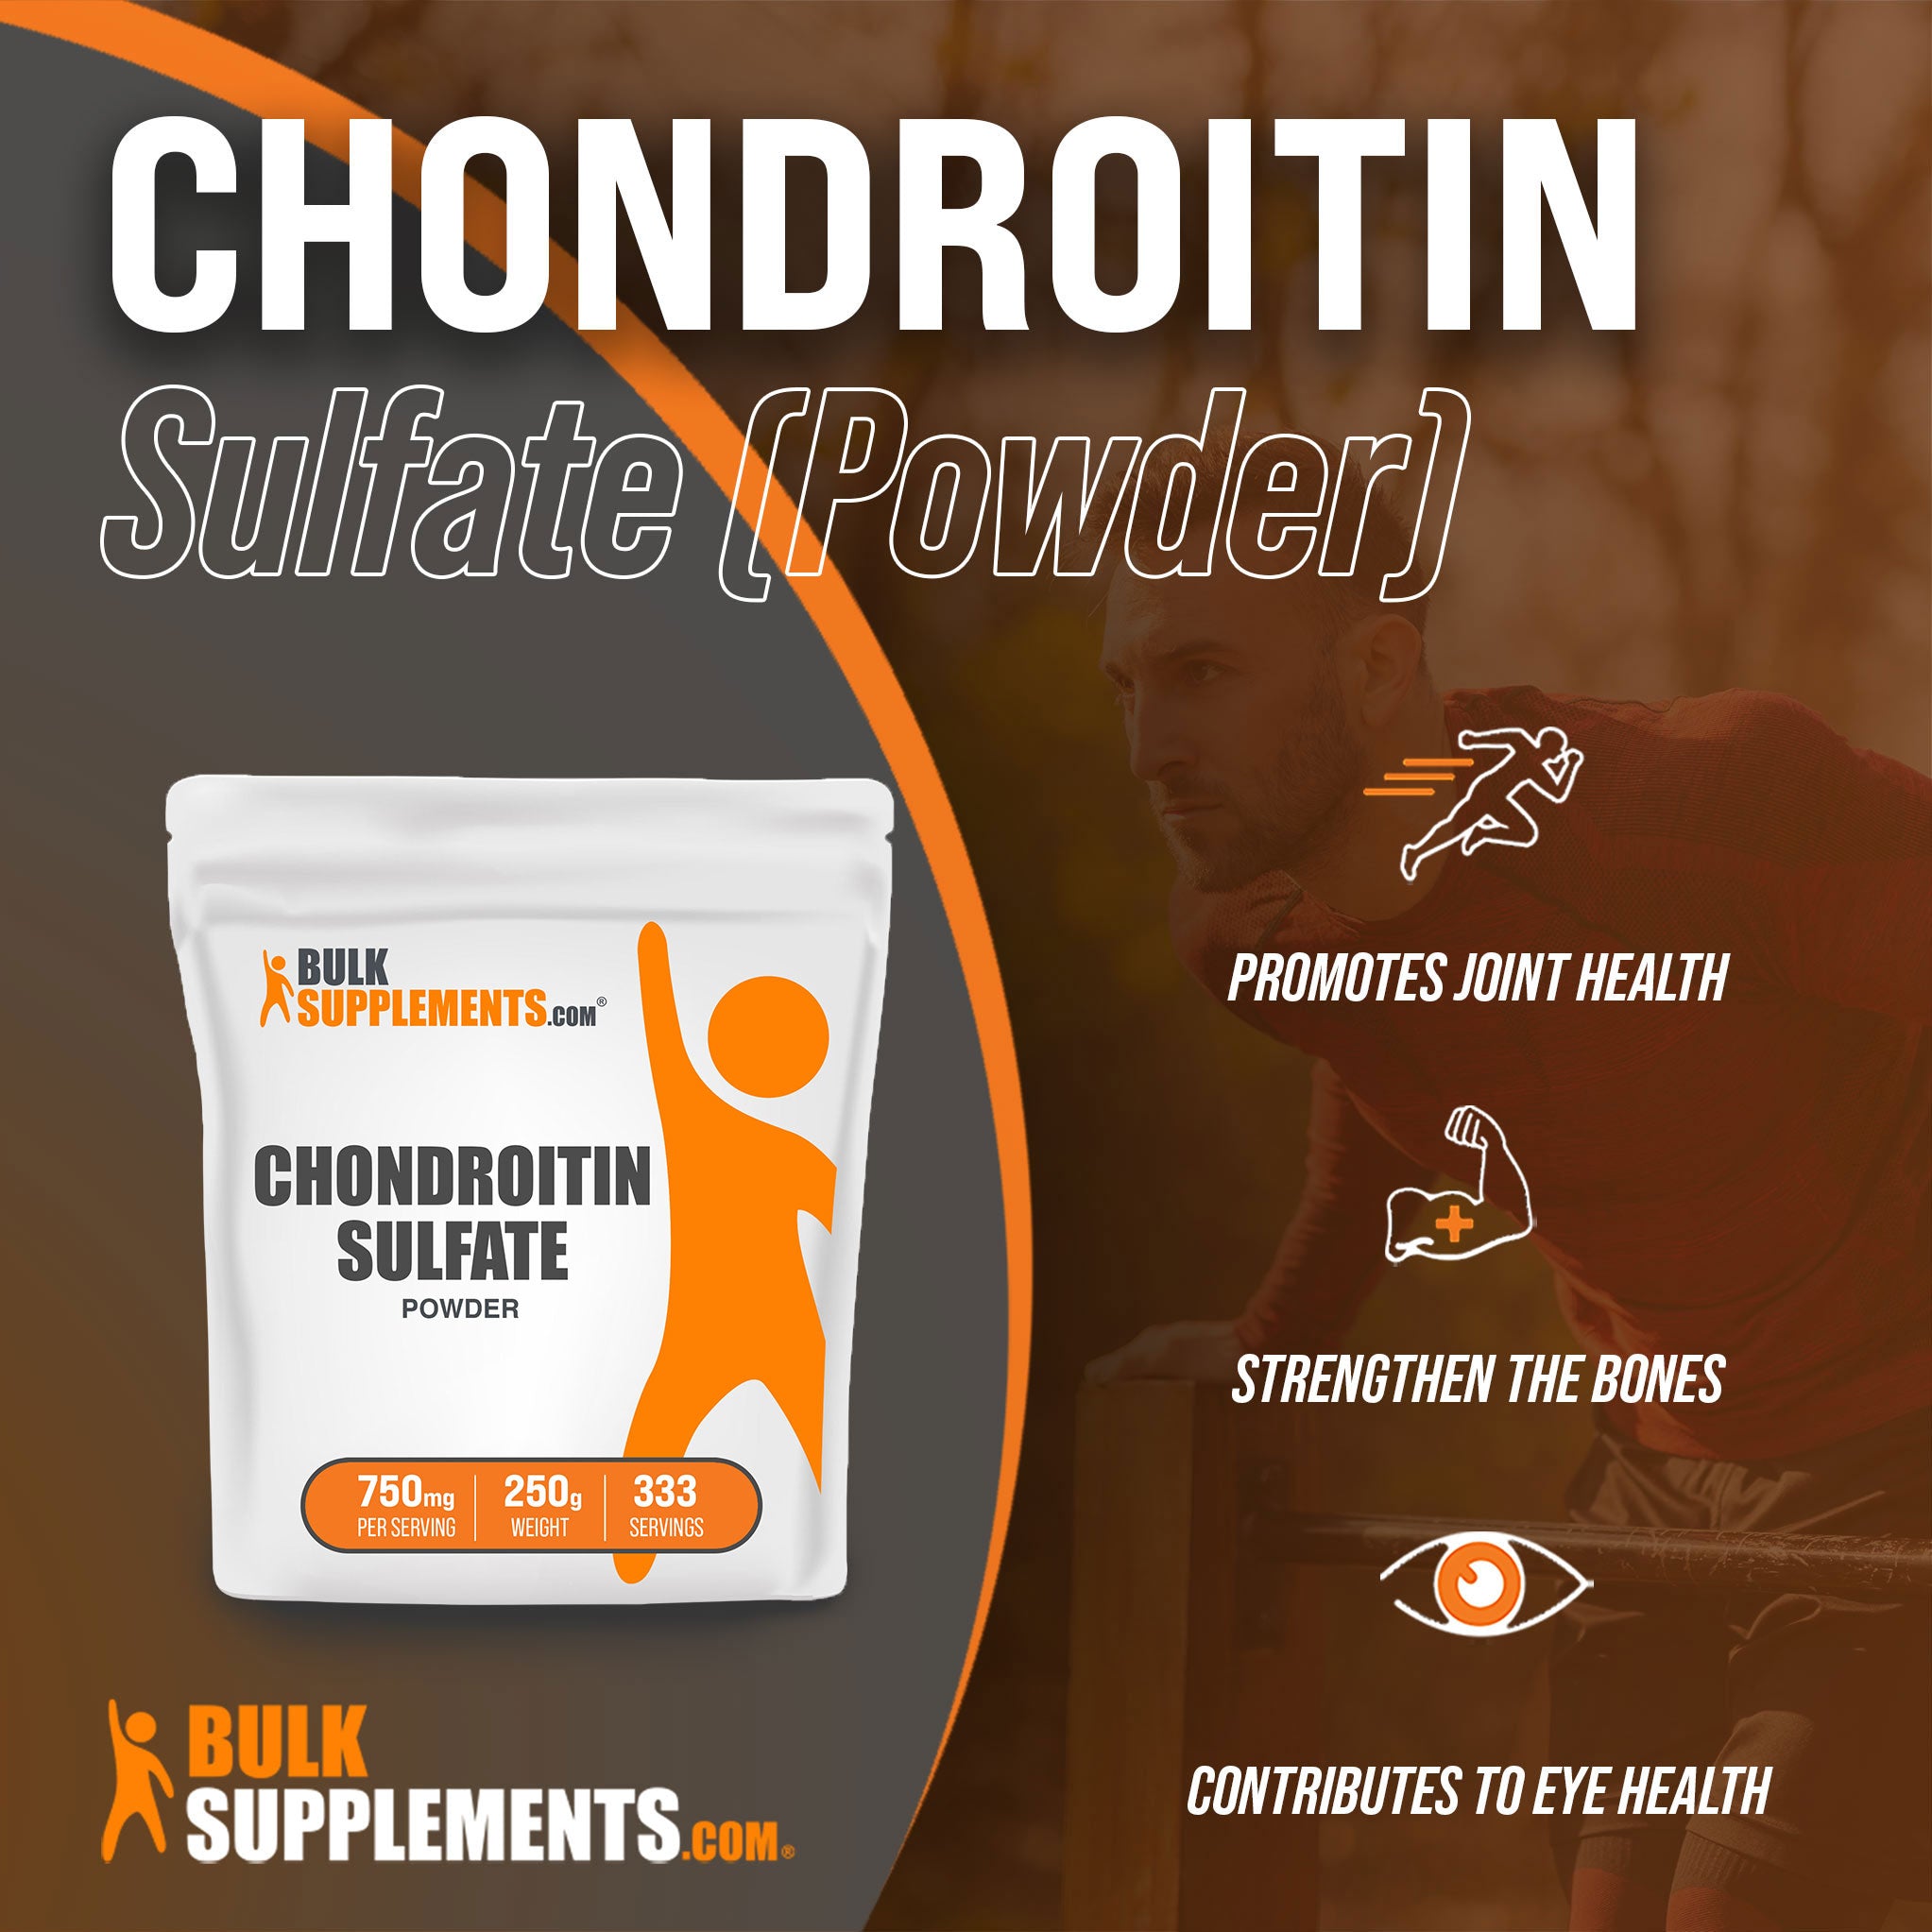 Benefits of 250g Chondroitin Sulfate Powder; joint support supplement, strengthen the bones, contributes to eye health